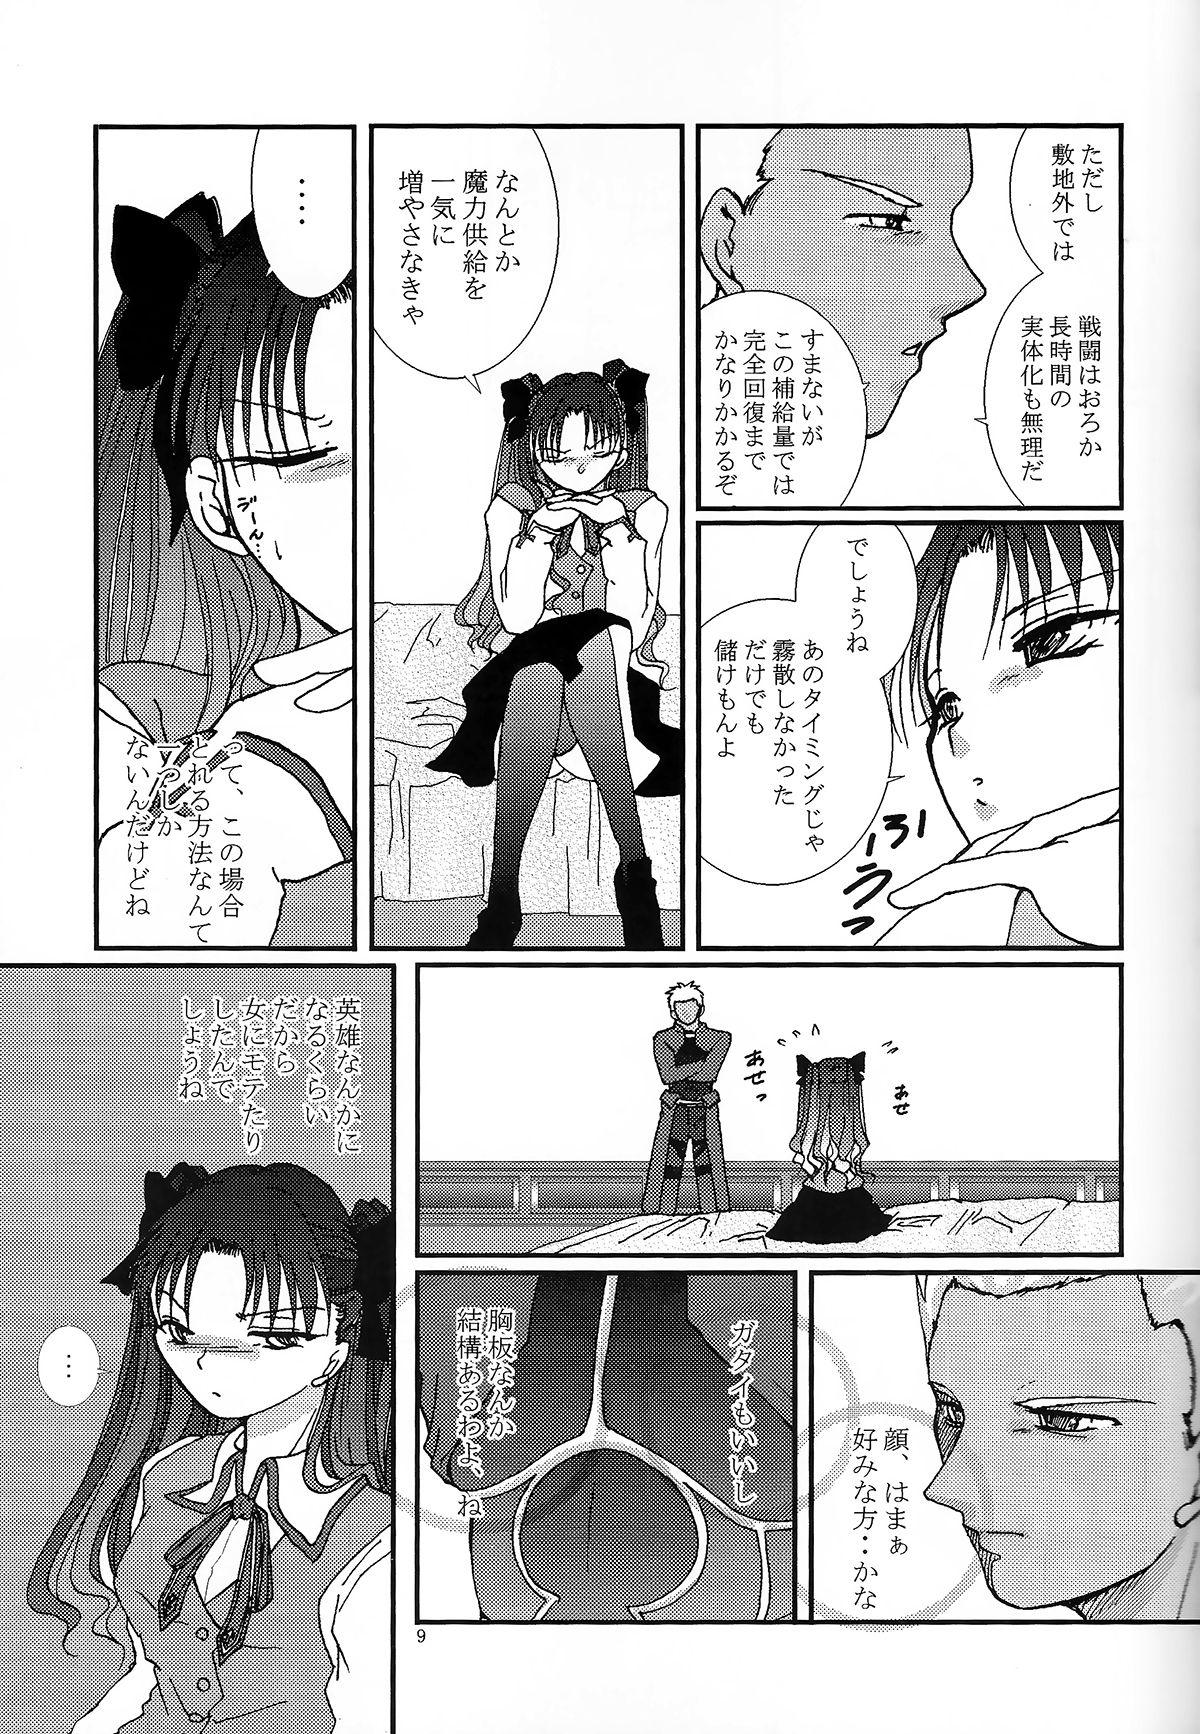 Masturbando Question-7 - Fate stay night Shaved - Page 7